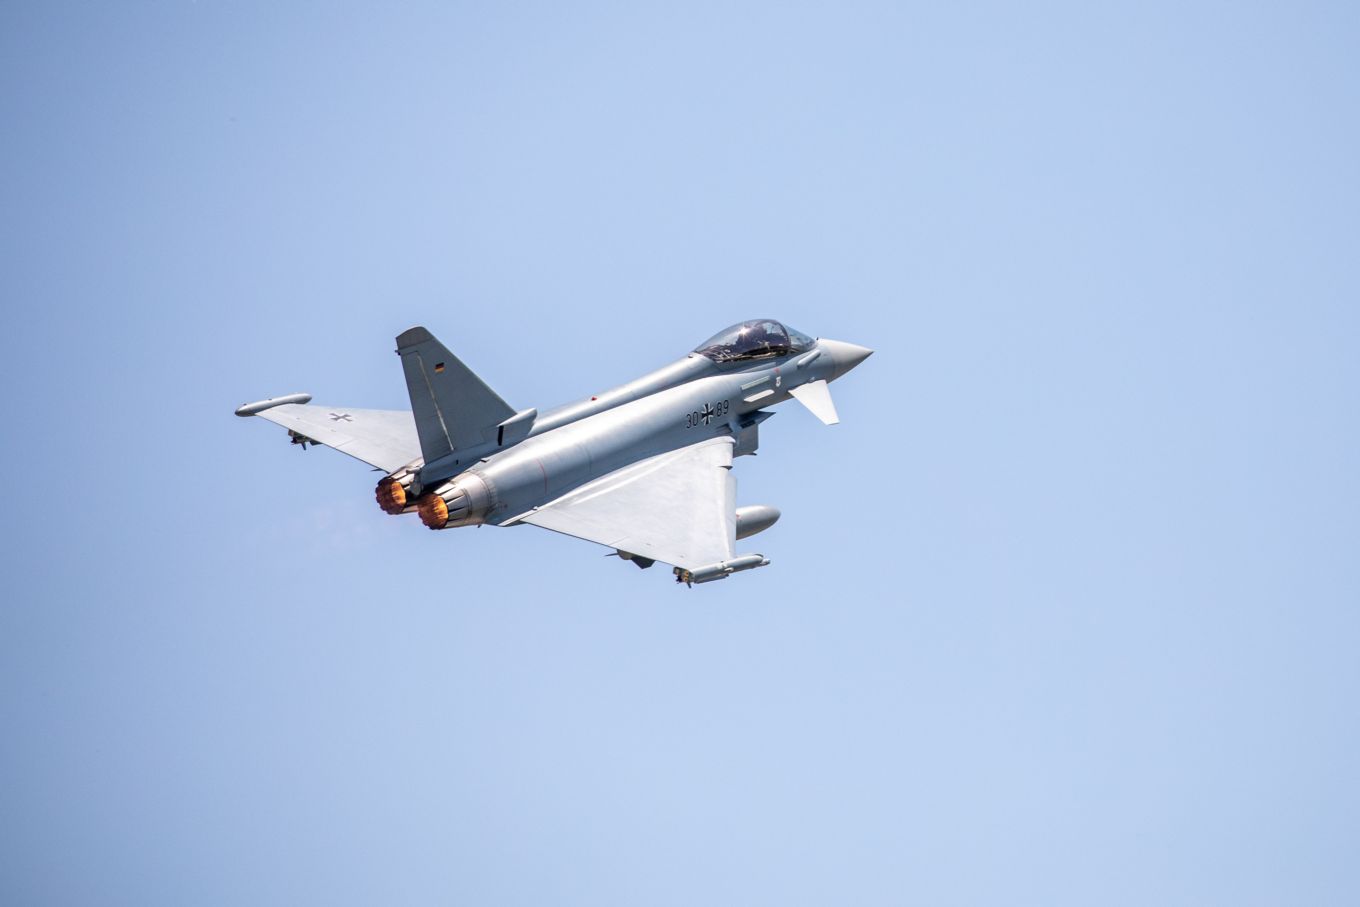 Image shows German Eurofighter flying.